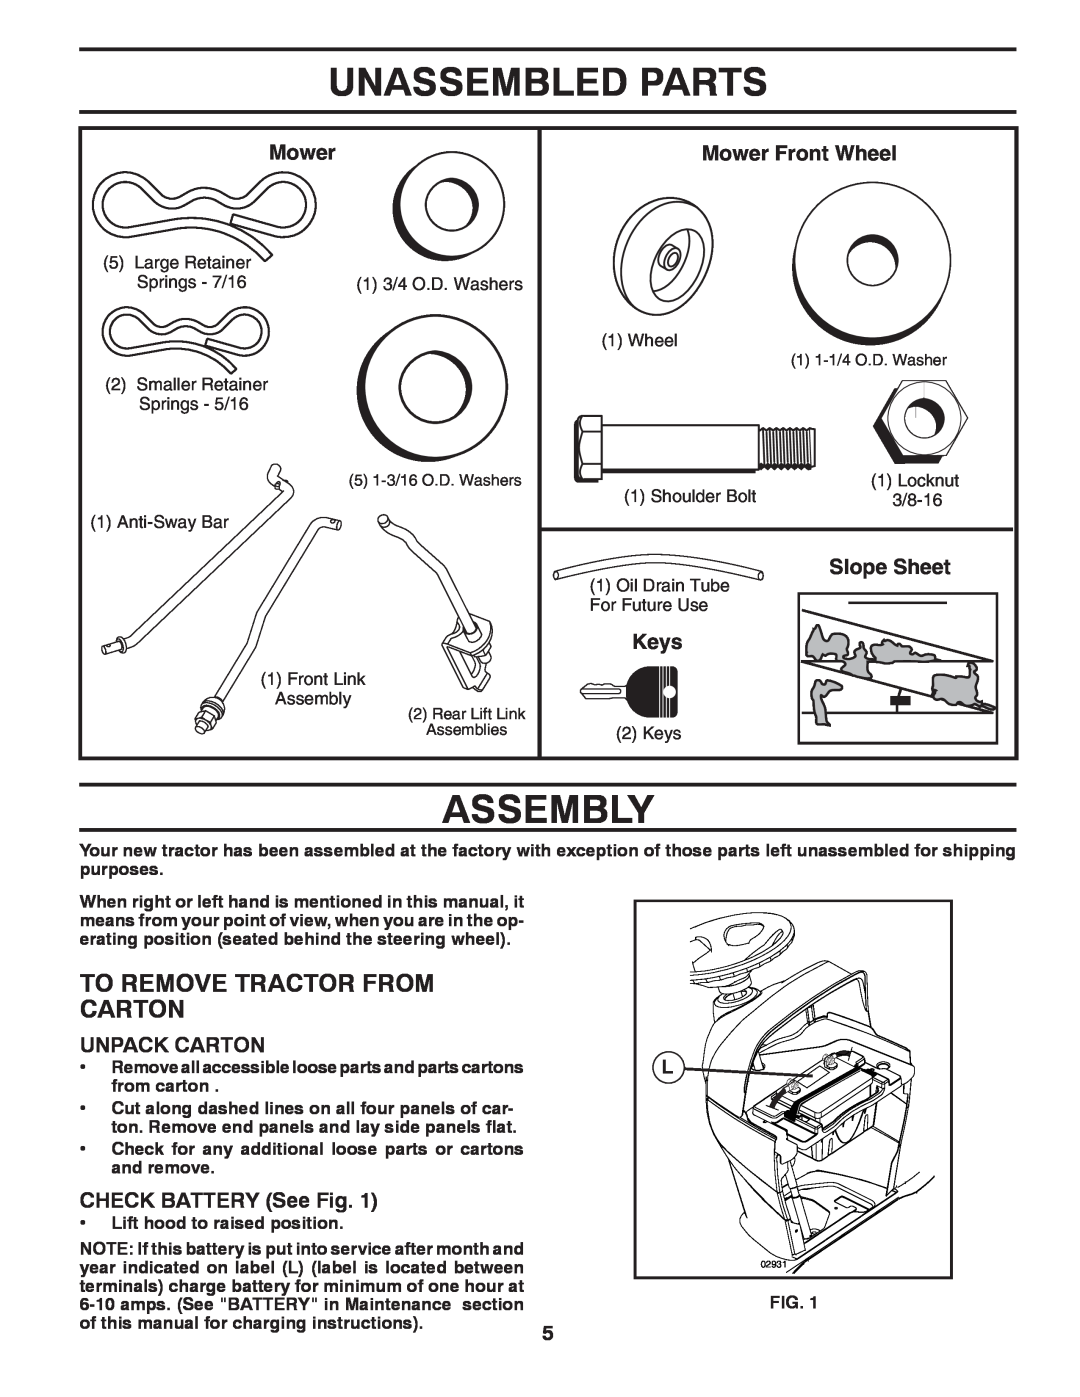 Poulan 425858 manual Unassembled Parts, Assembly, To Remove Tractor From Carton, Mower Front Wheel, Slope Sheet, Keys 